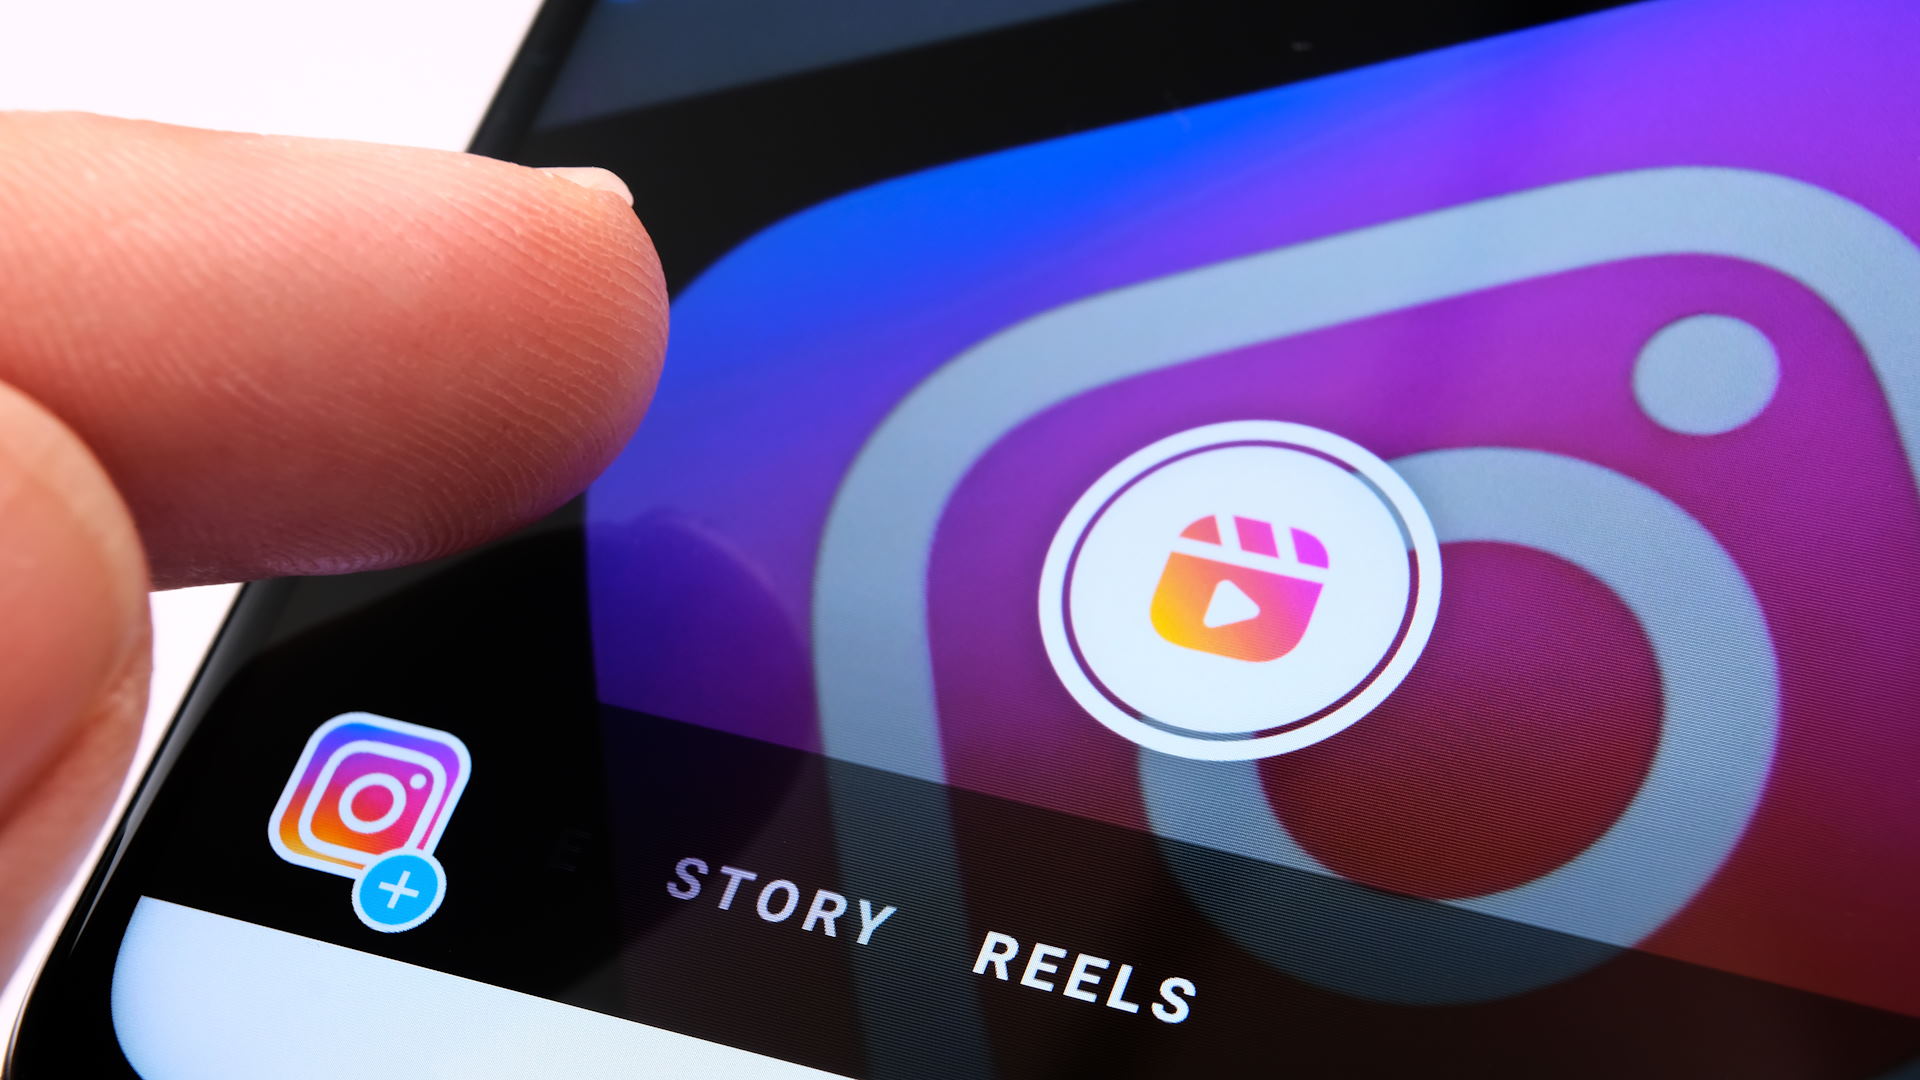 Instagram is experimenting with extended Reels recordings of up to 10 minutes